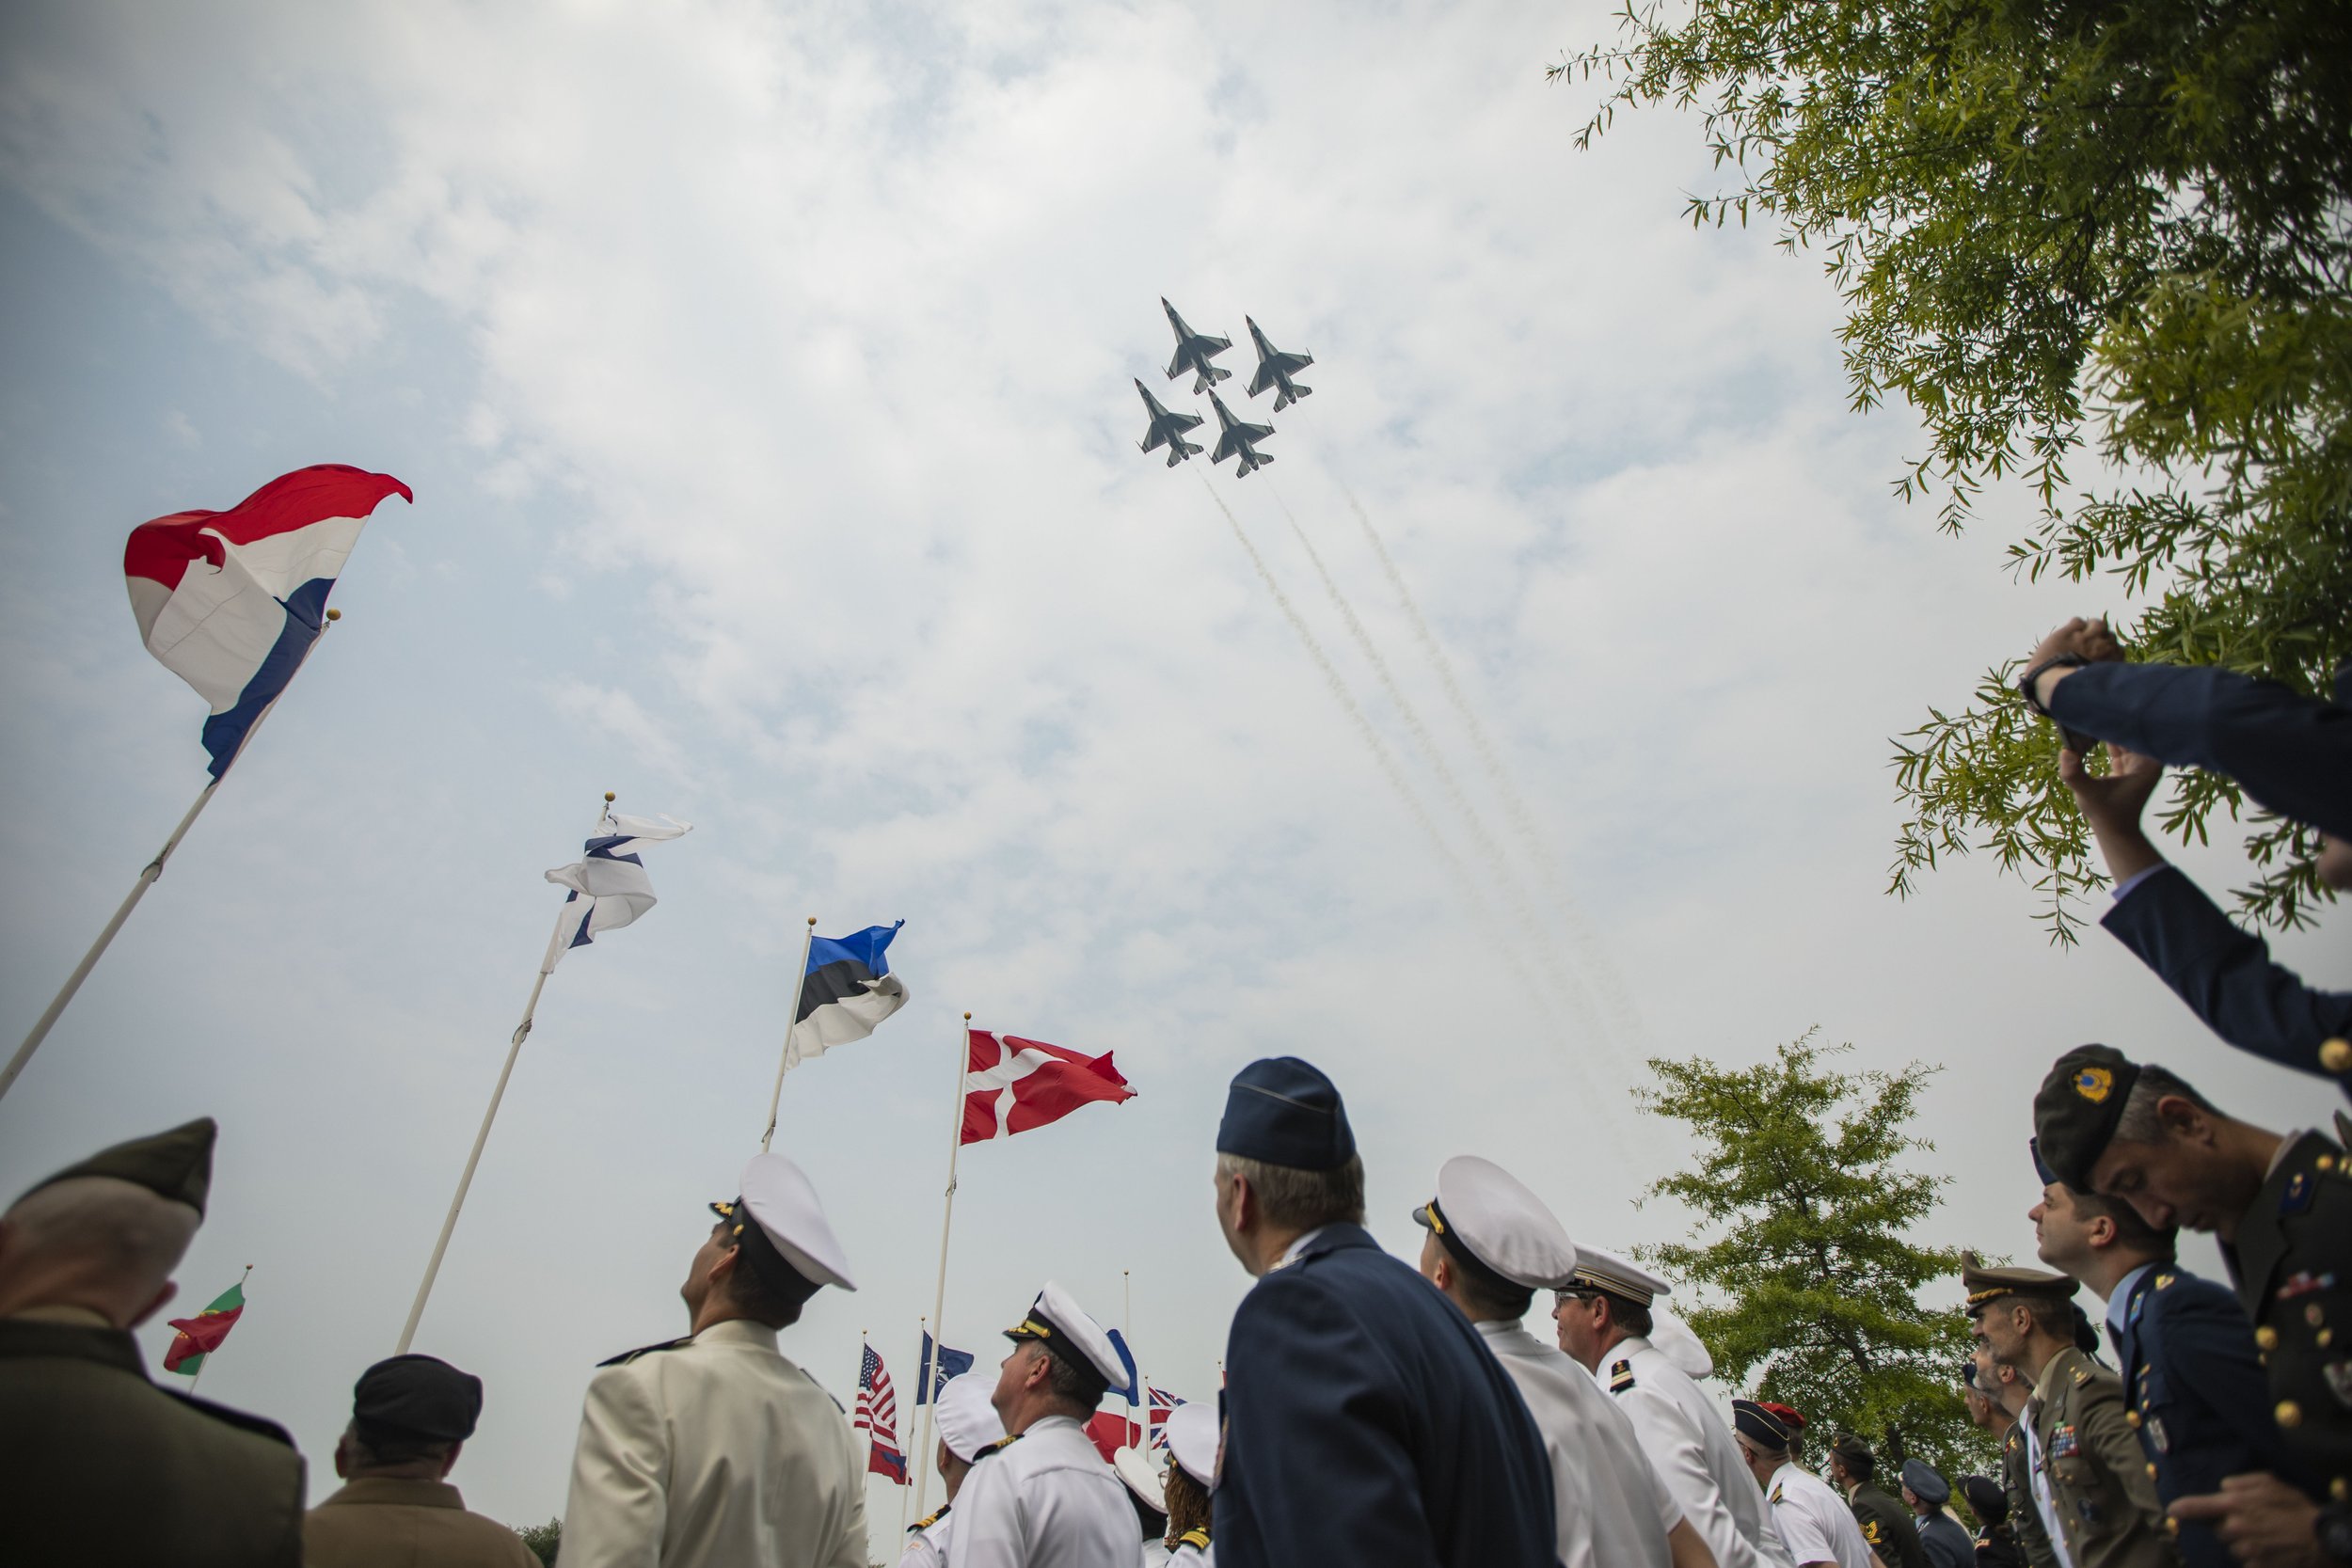  NATO officials watch as the U.S. Air Force Thunderbirds flyover in celebration of NATO's Norfolk headquarters 20th Anniversary on Wednesday, June 7, 2023 in Norfolk, Va. Leadership showcased the Allied Command Transformation's work with an exhibit h